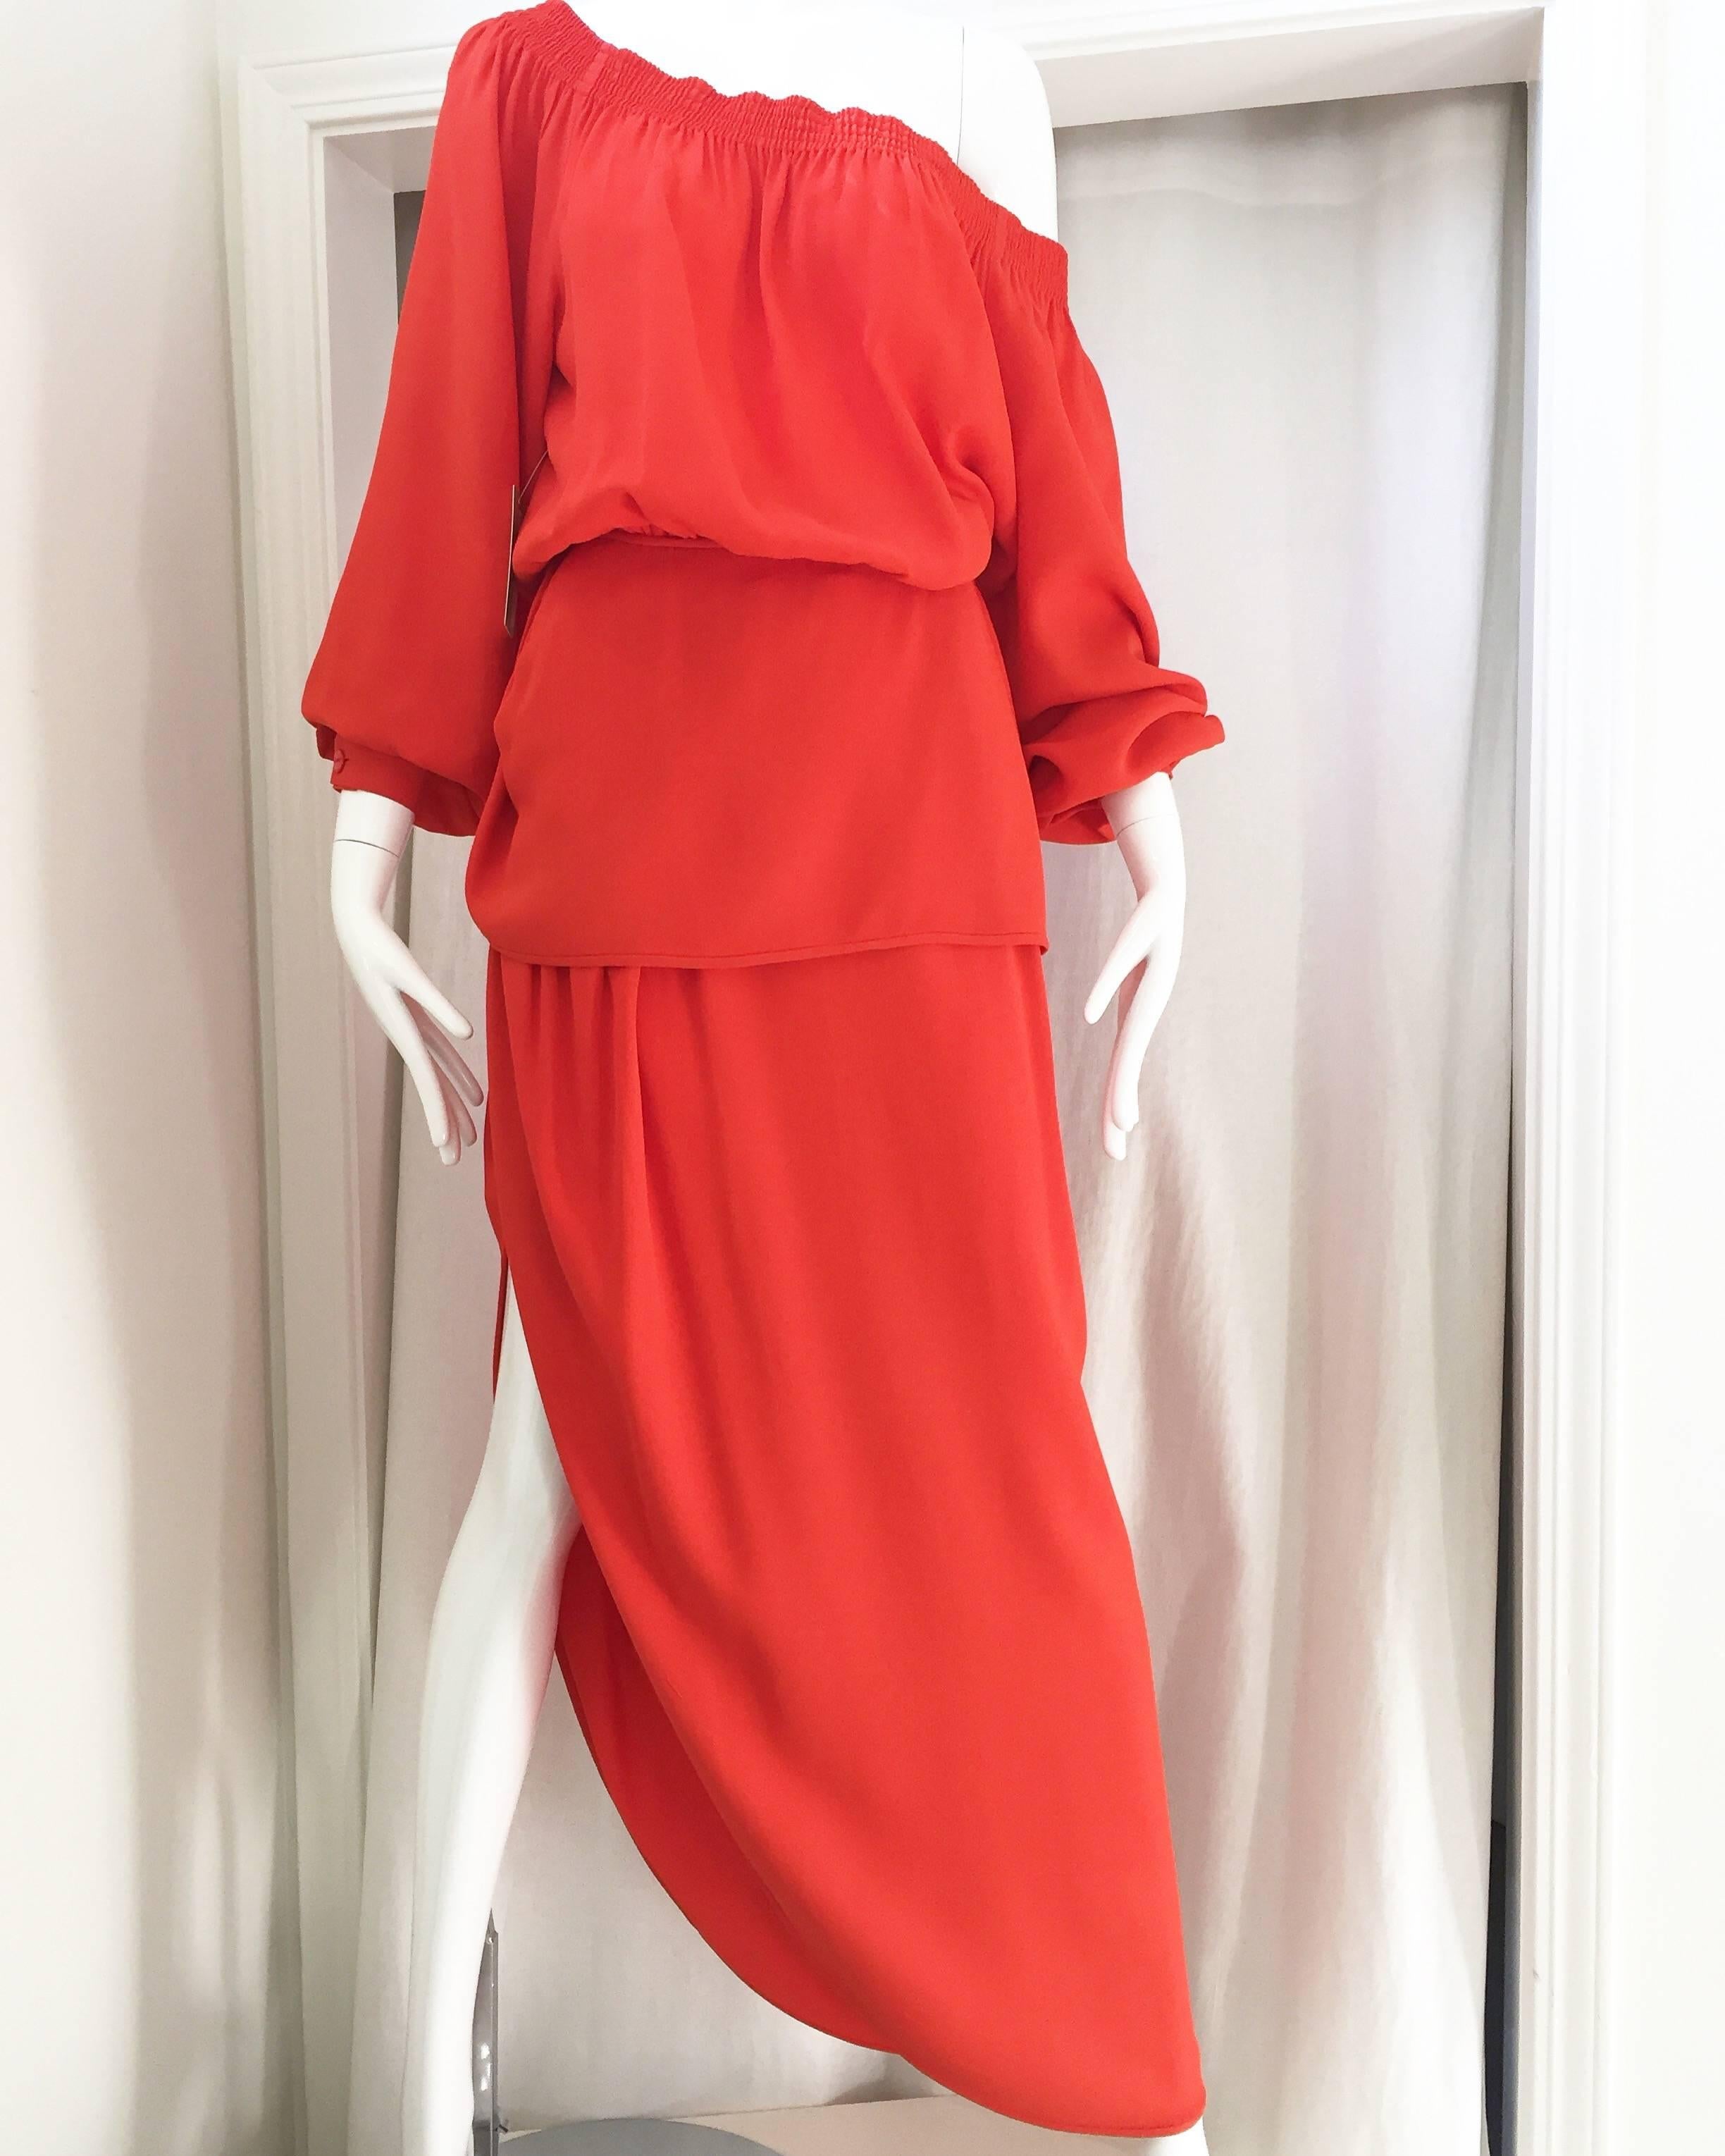 In Valentino’s iconic scarlet, a vintage 1970s two piece crepe ensemble. Classically proportioned tunic off shoulder blouse with full sleeves and long bias skirt.  It is absolutely gorgeous.  Skirt has slit on the side.

Size : SMALL / 4
Bust: